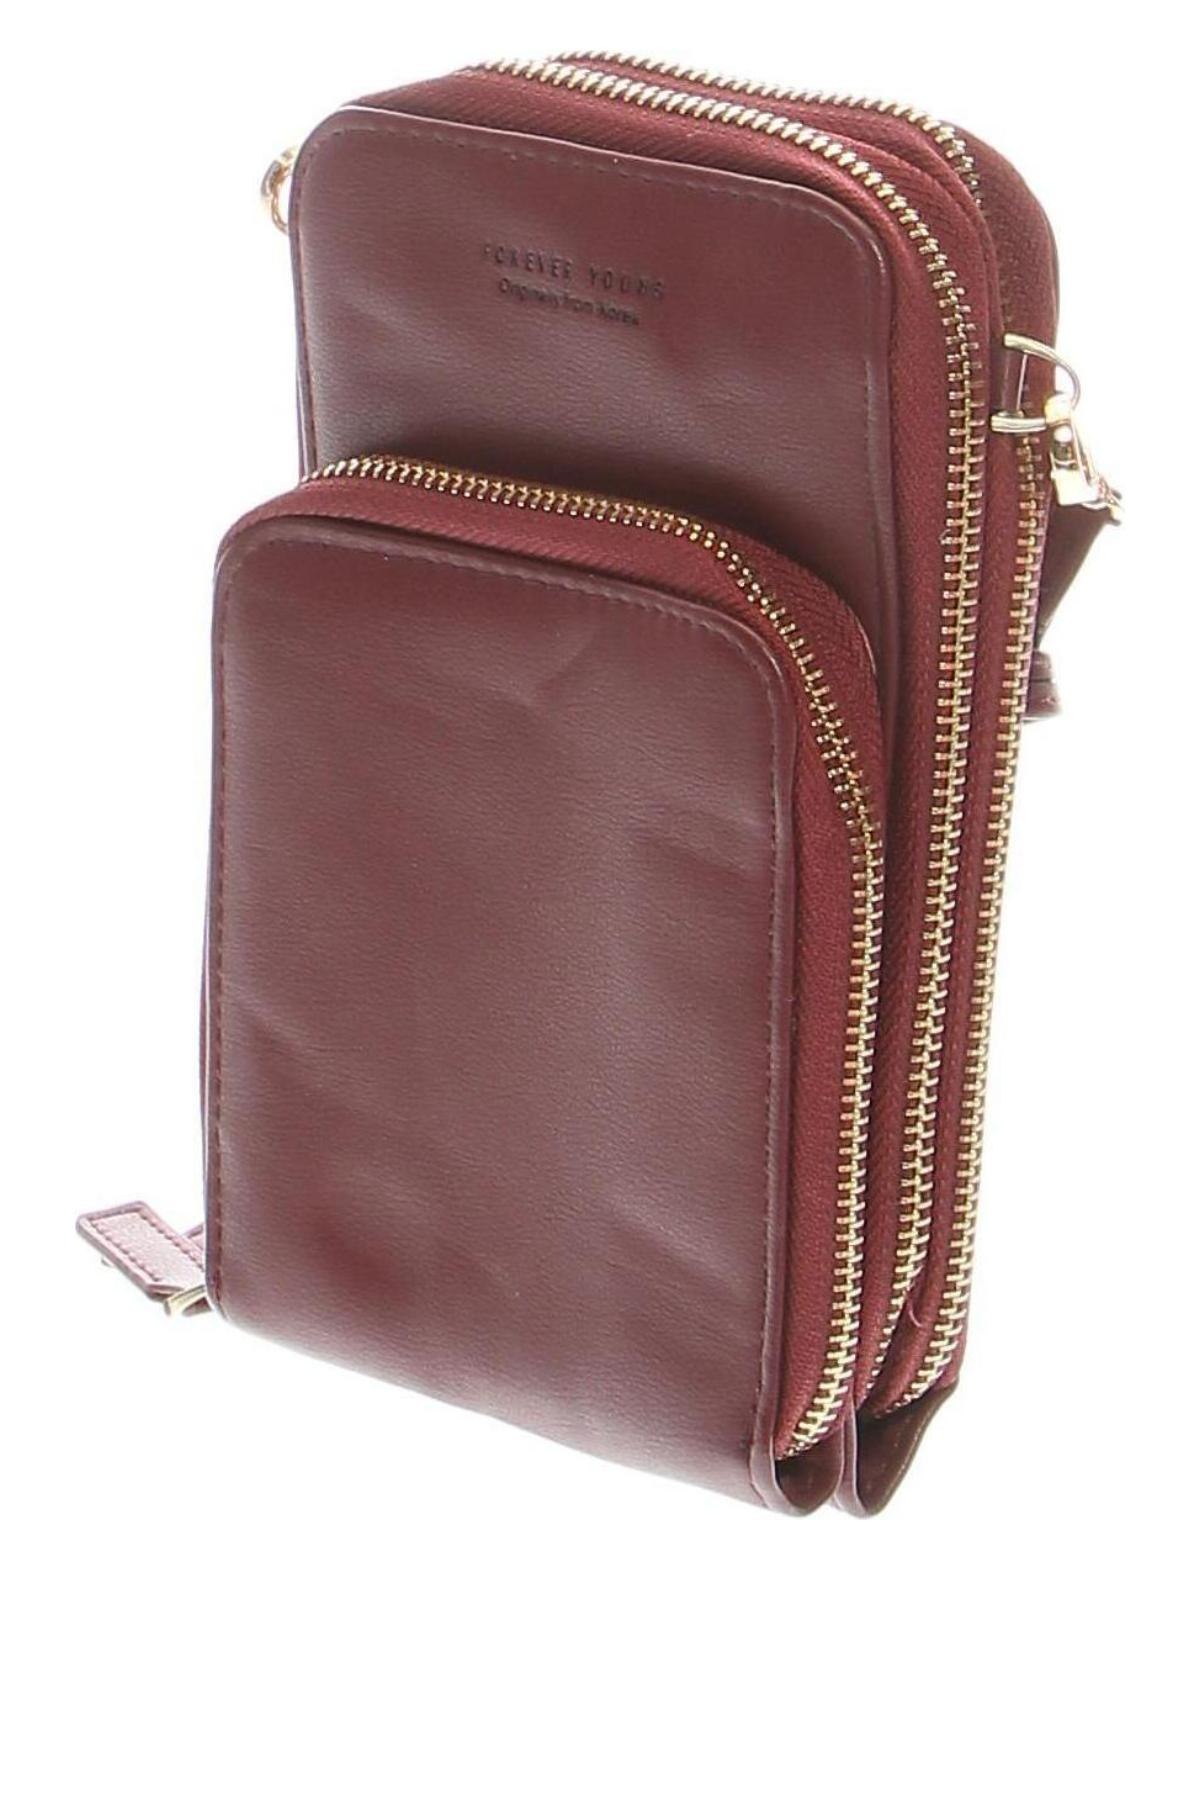 Handytasche Forever Young by Chicoree, Farbe Lila, Preis € 15,03